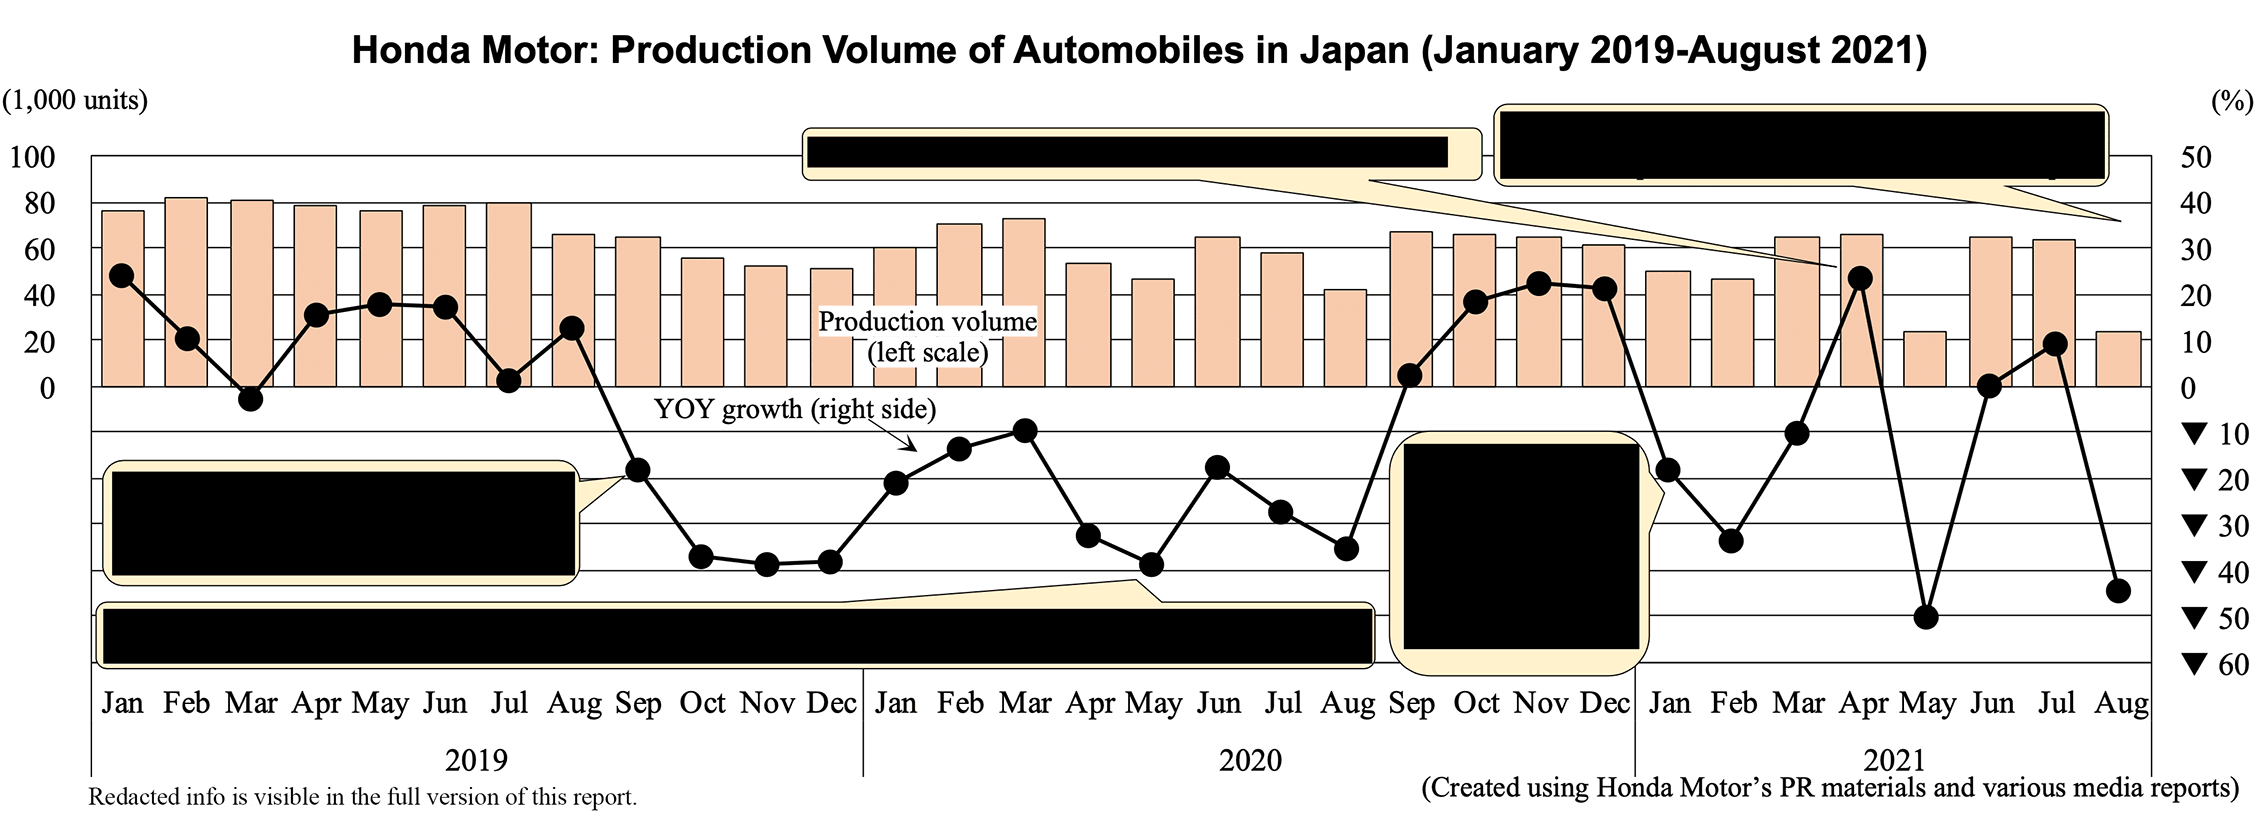 Honda Motor: Production Volume of Automobiles in Japan (January 2019-August 2021)